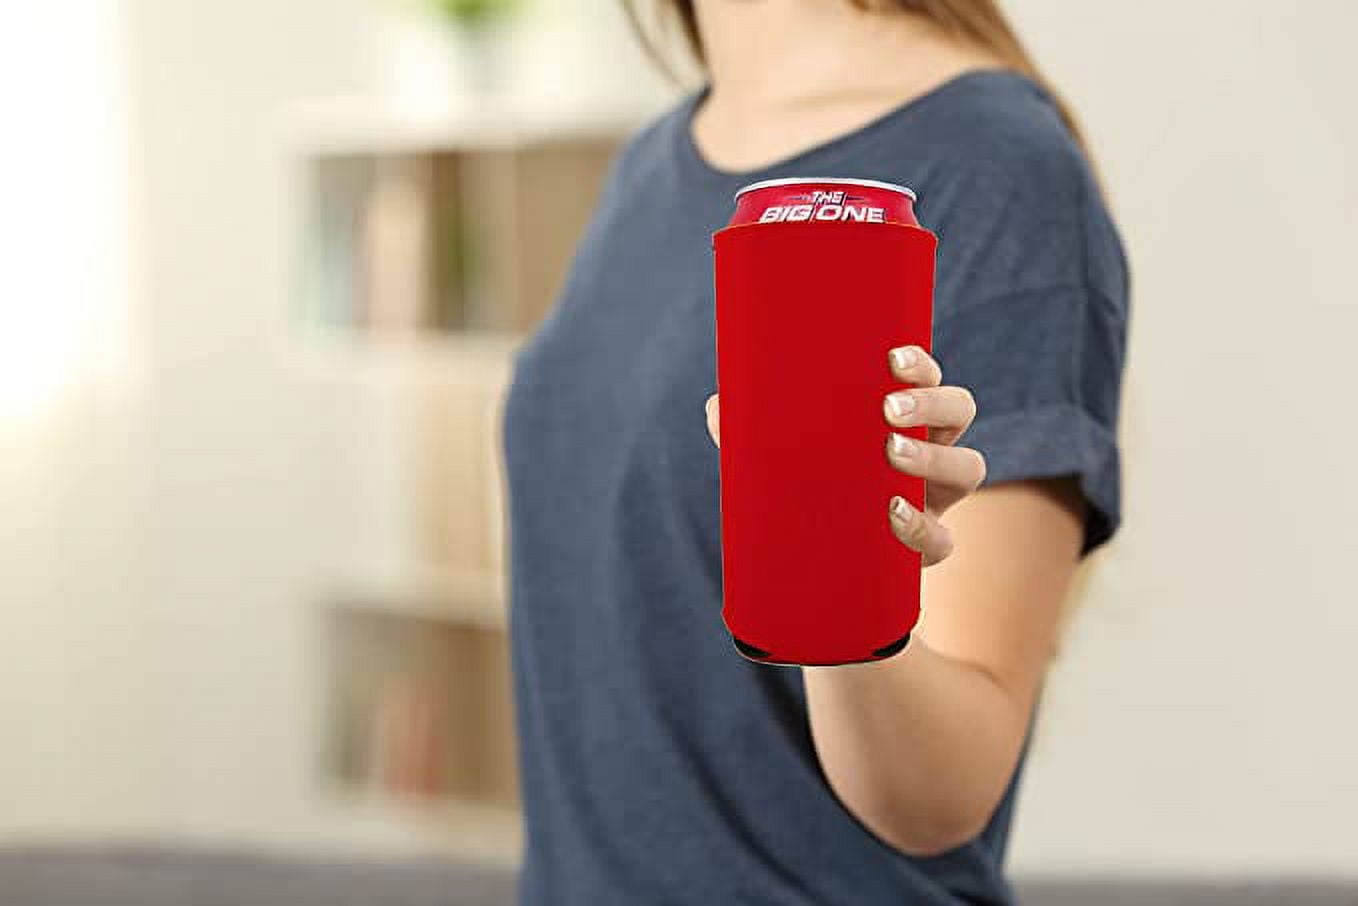 Collapsible 24 oz. Can Coolers